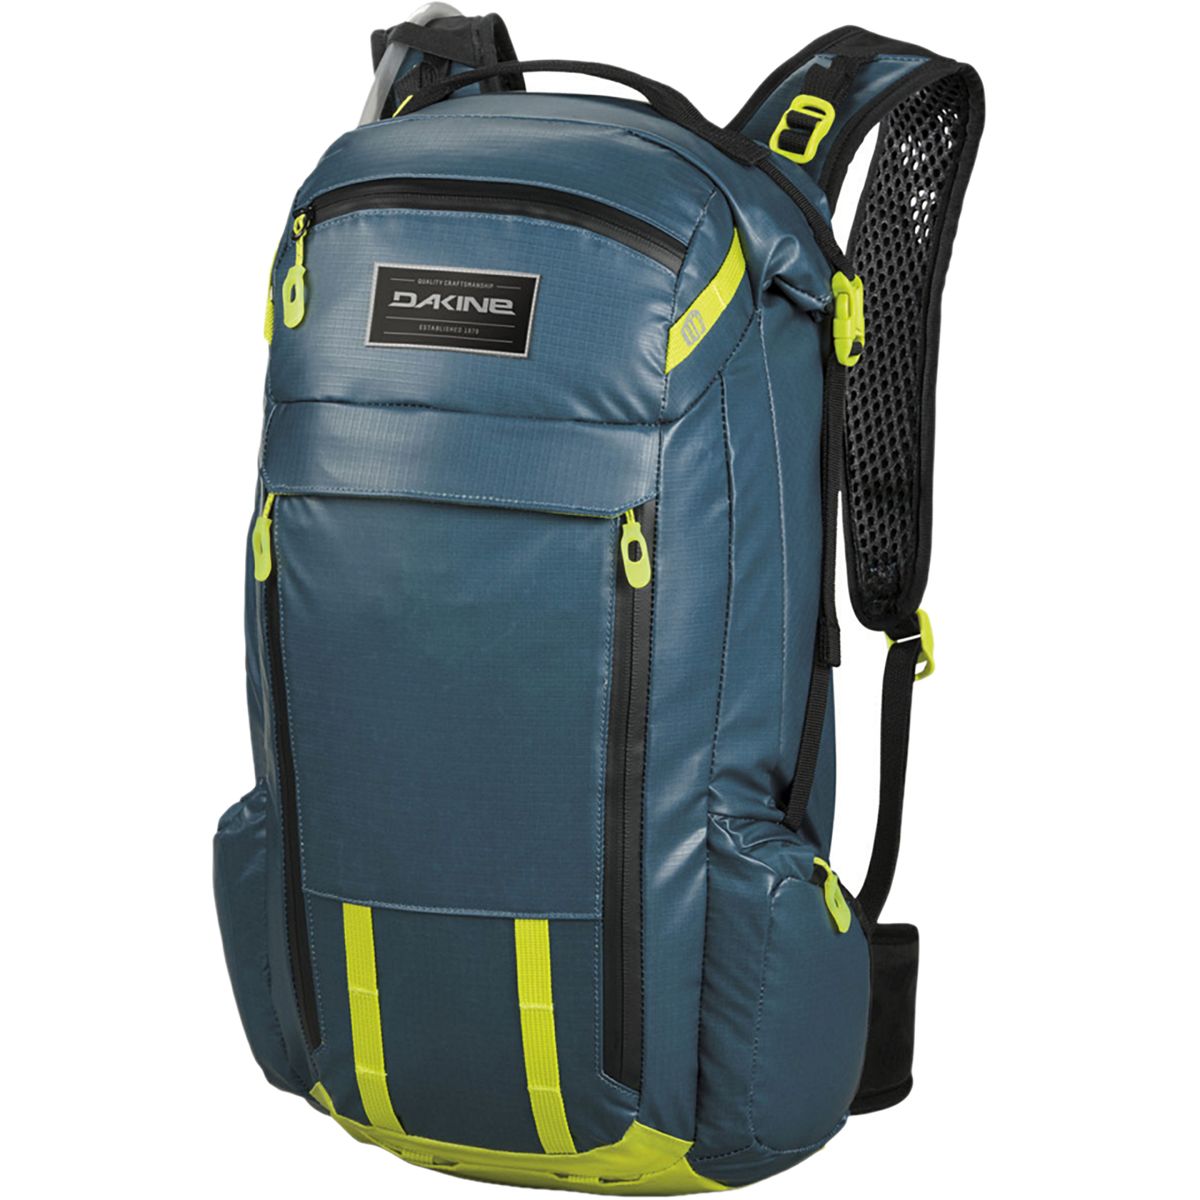 DAKINE Seeker 15L Hydration Pack with Spine Protector